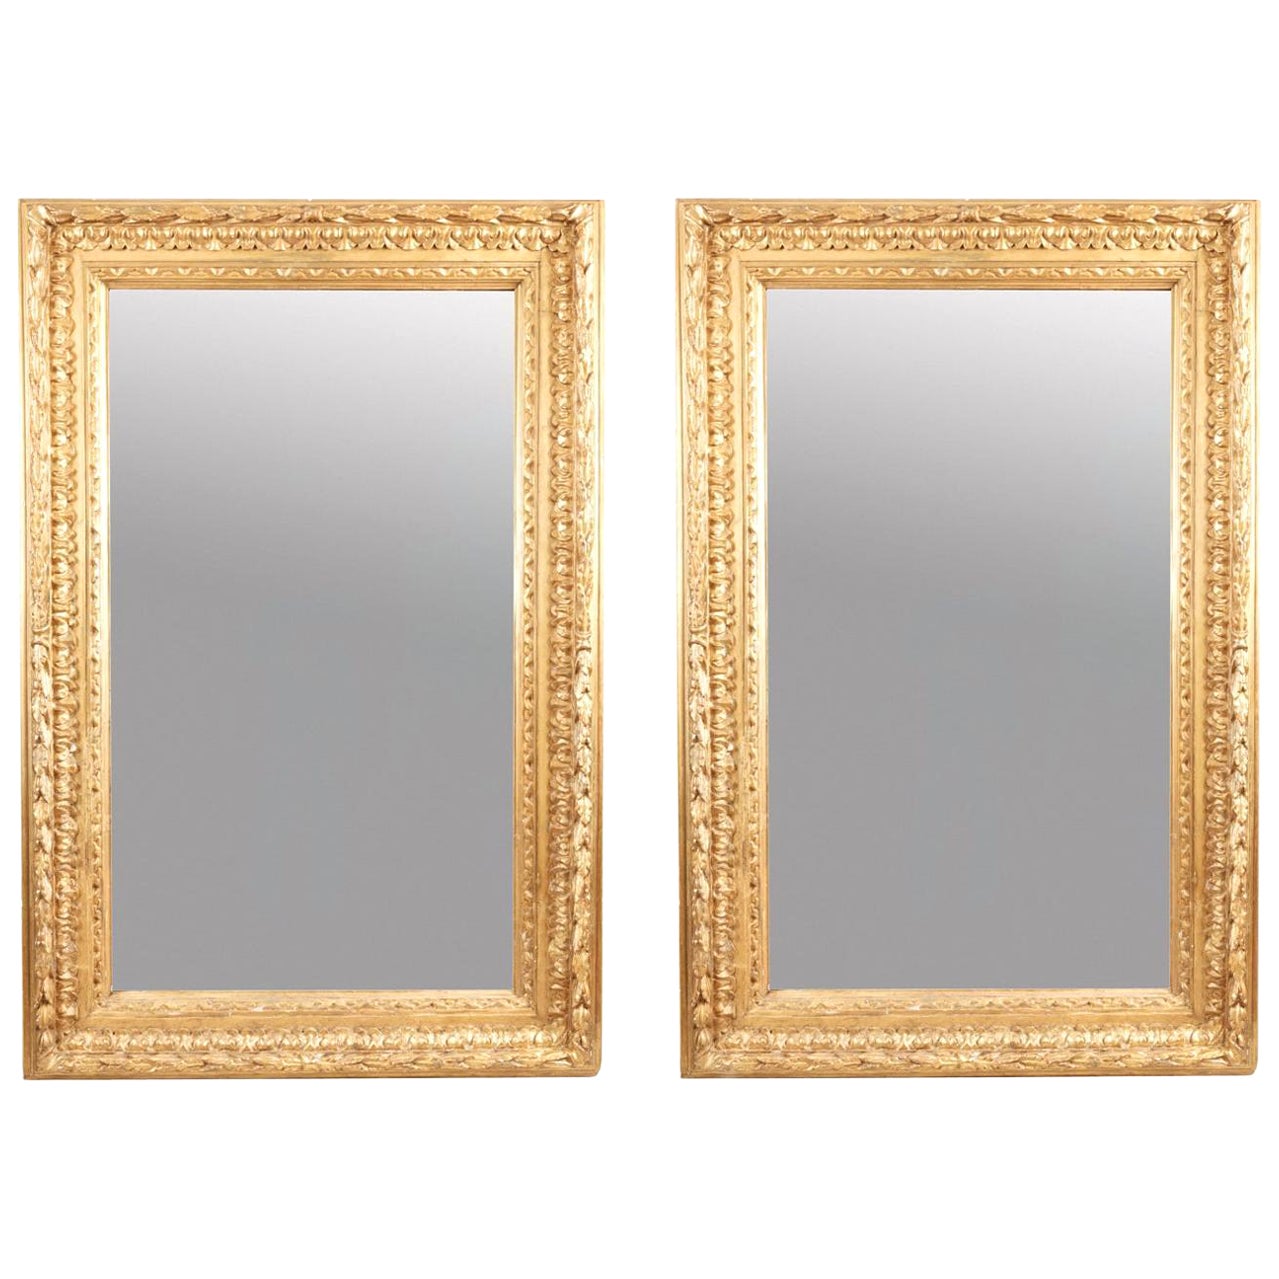 Pair Of Overmantle Mirrors - 2 For Sale on 1stDibs